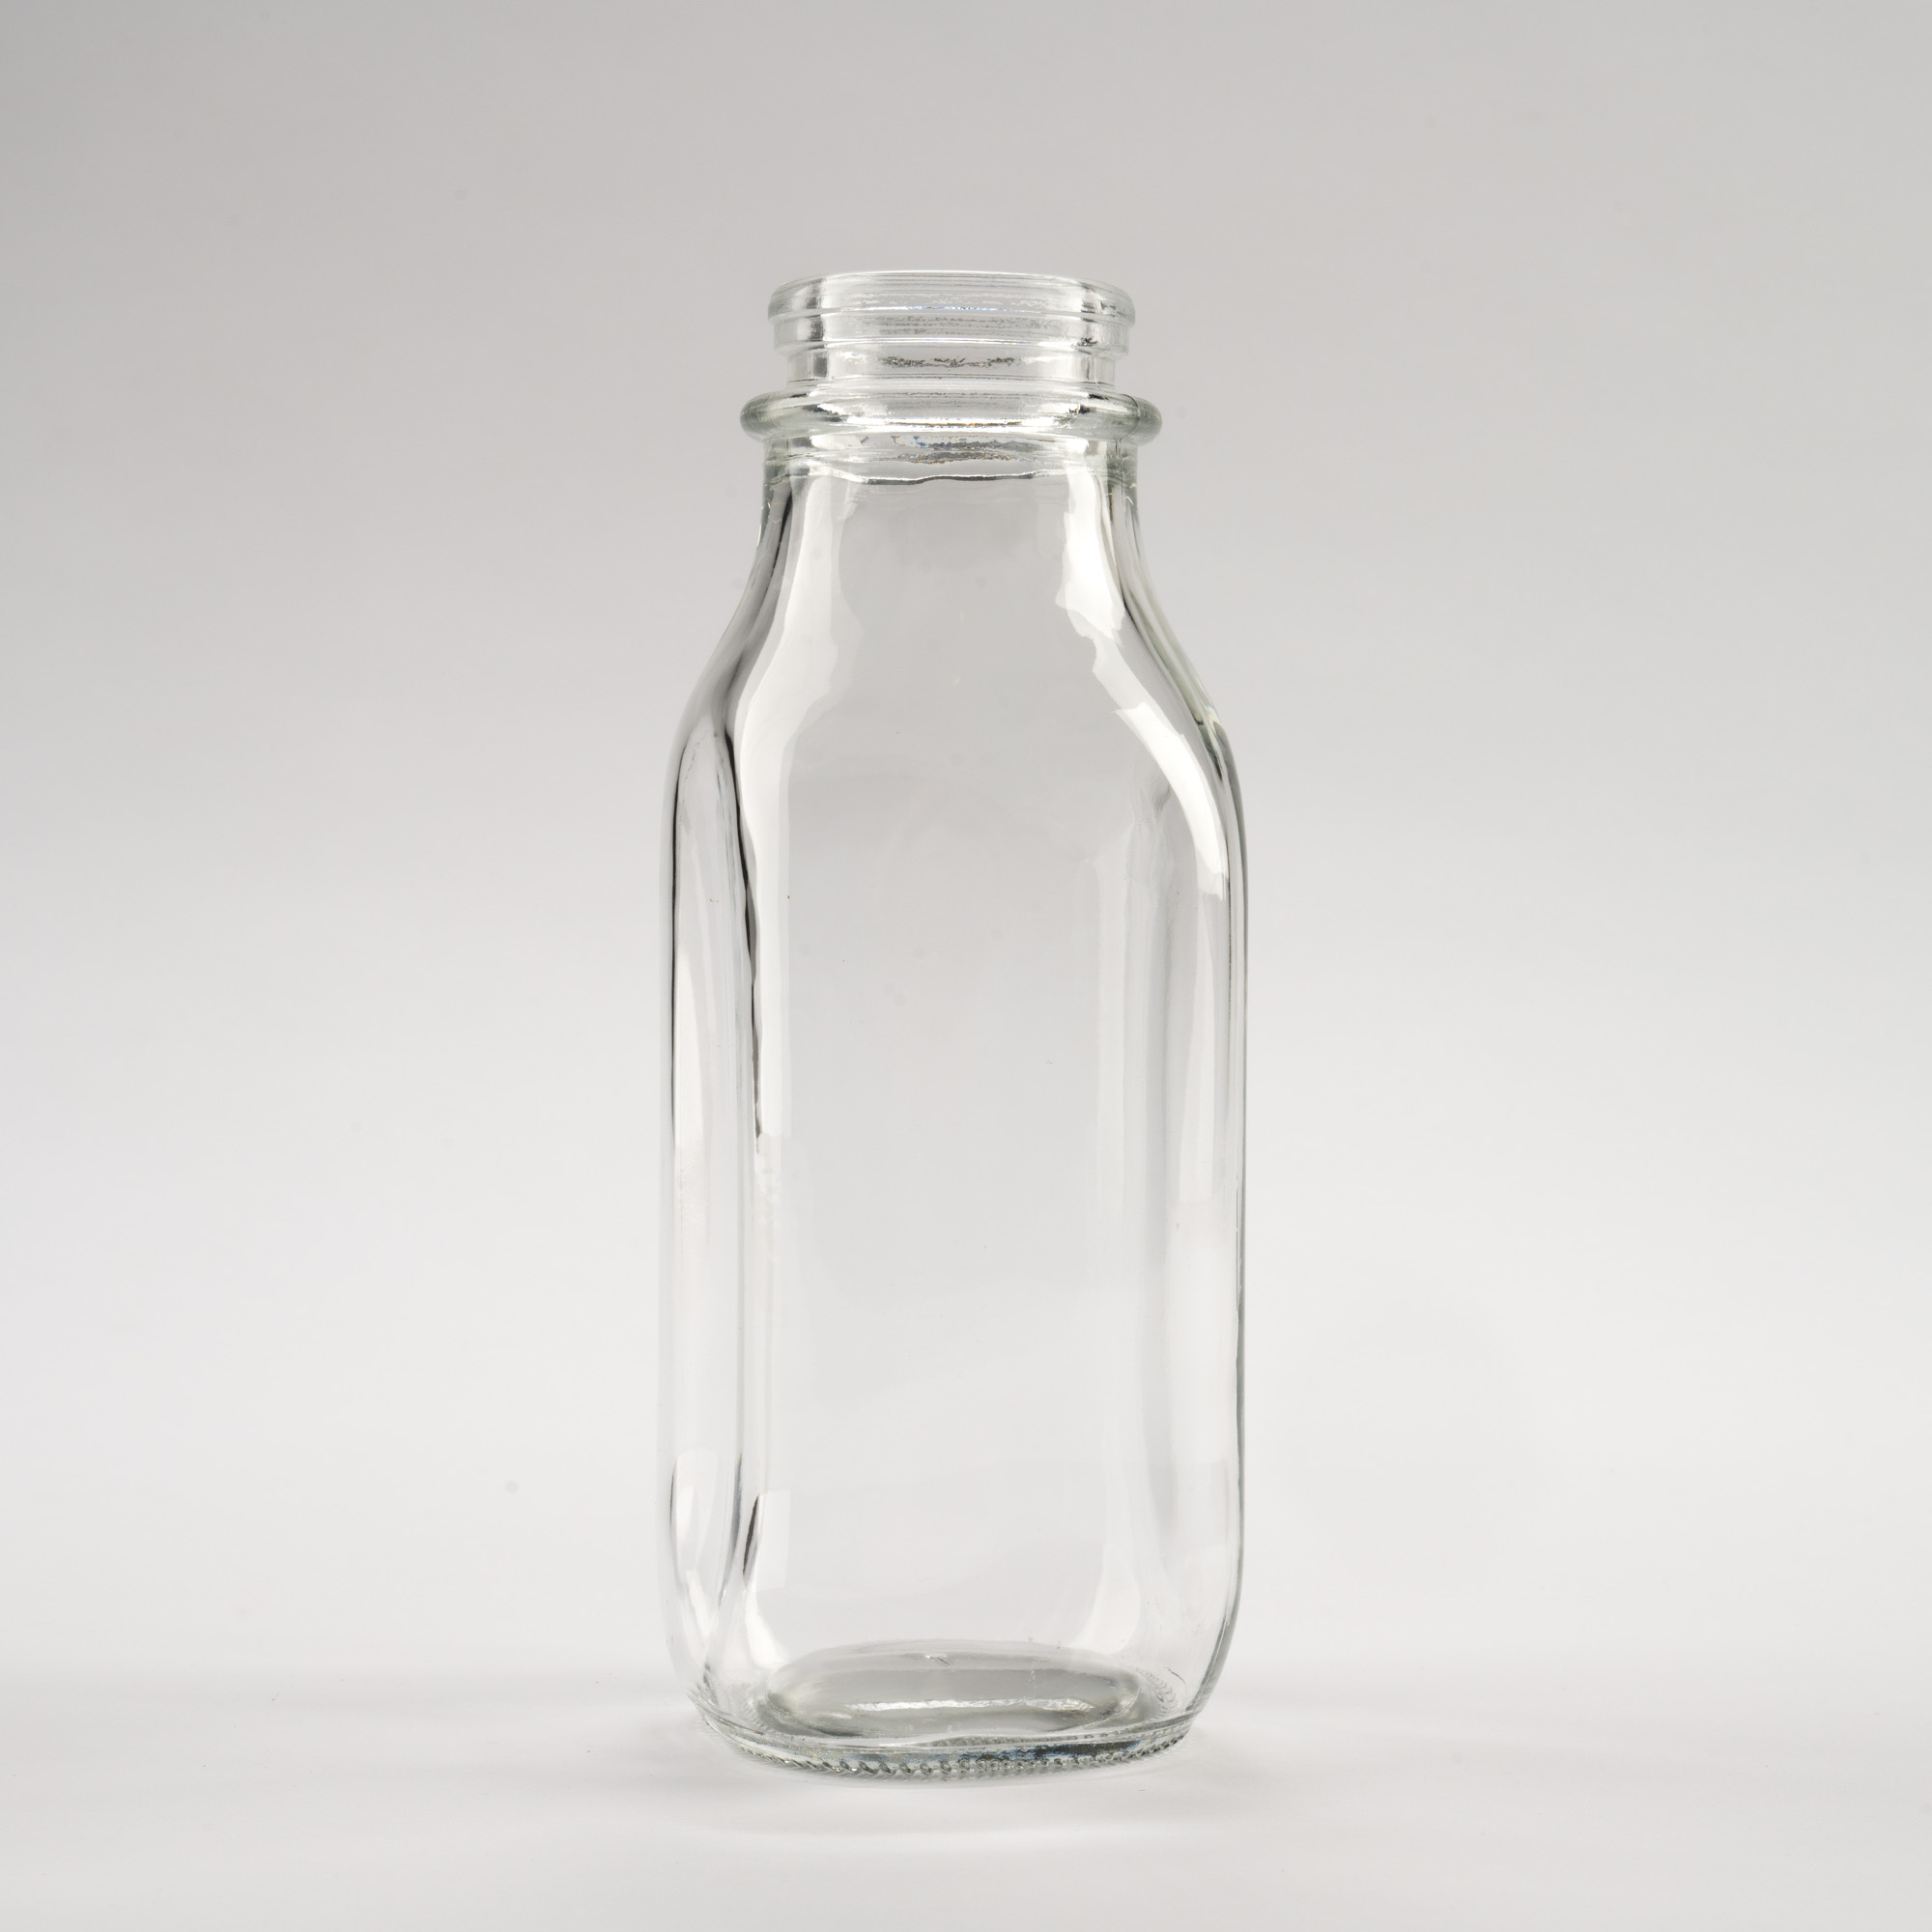 12 Packs: 6 Ct. (72 total) 8oz. Glass Milk Bottles with Lids by Ashland, Clear